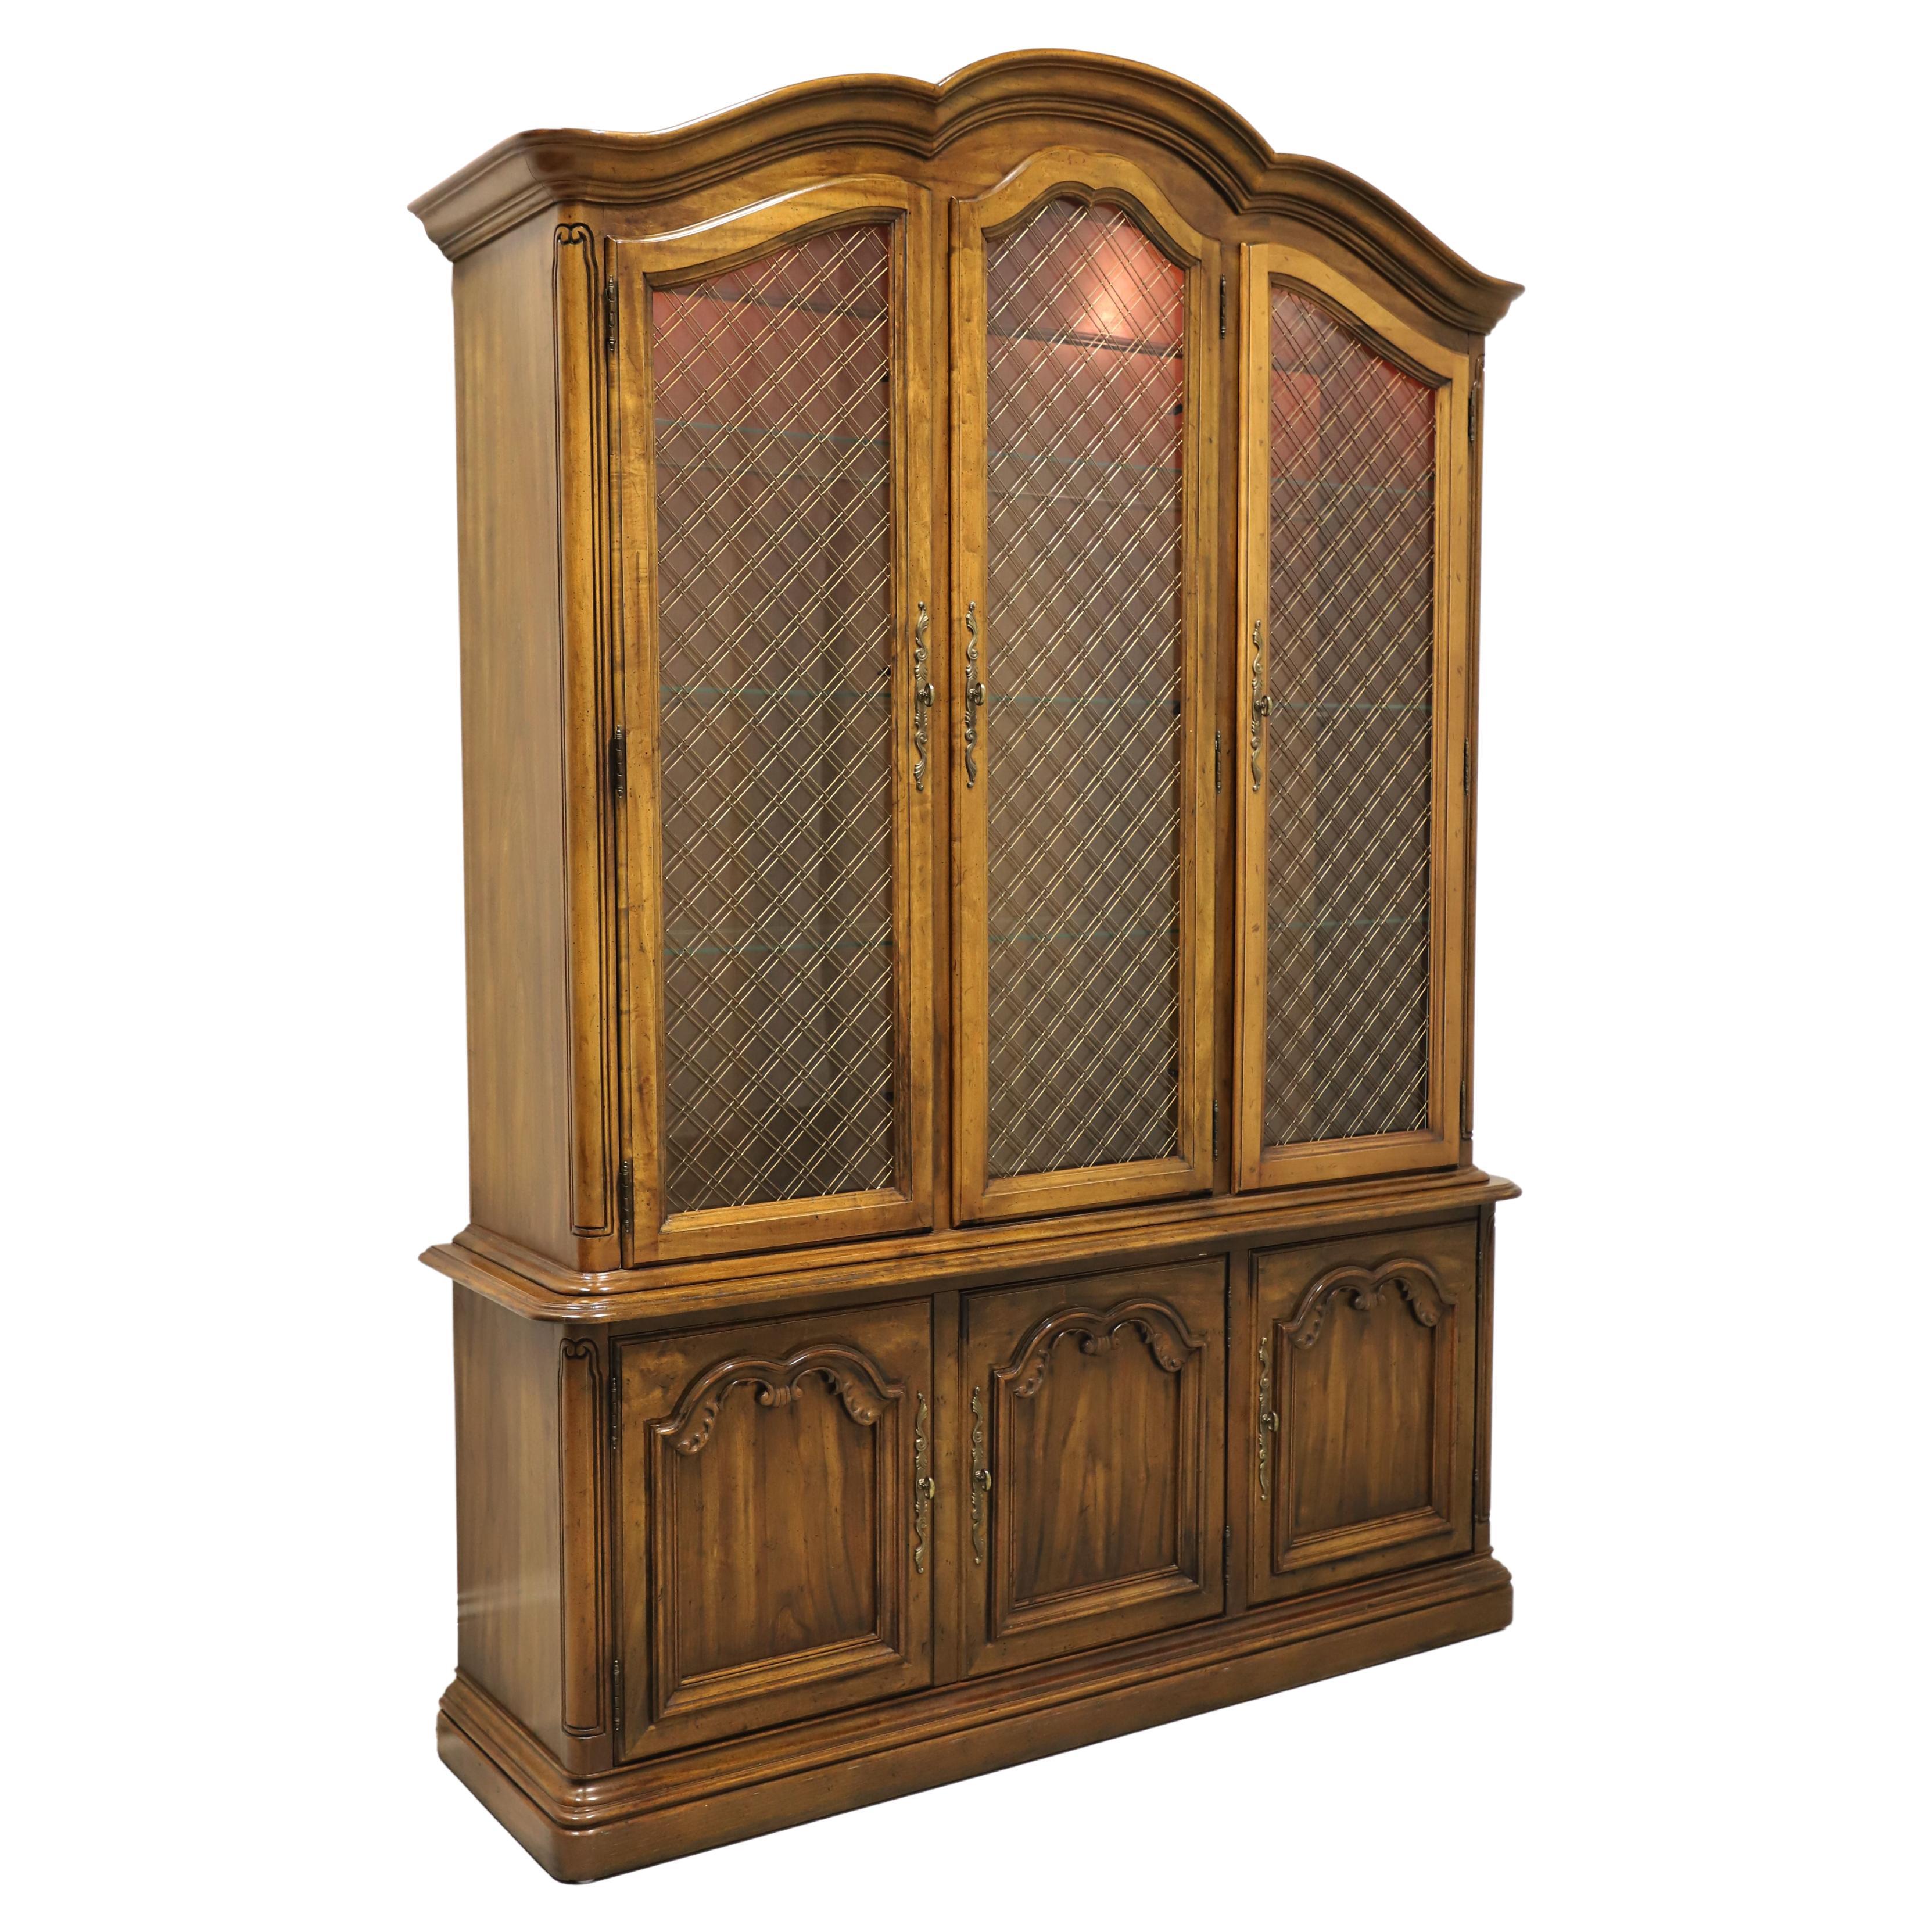 DREXEL Touraine II Pecan French Country China Cabinet